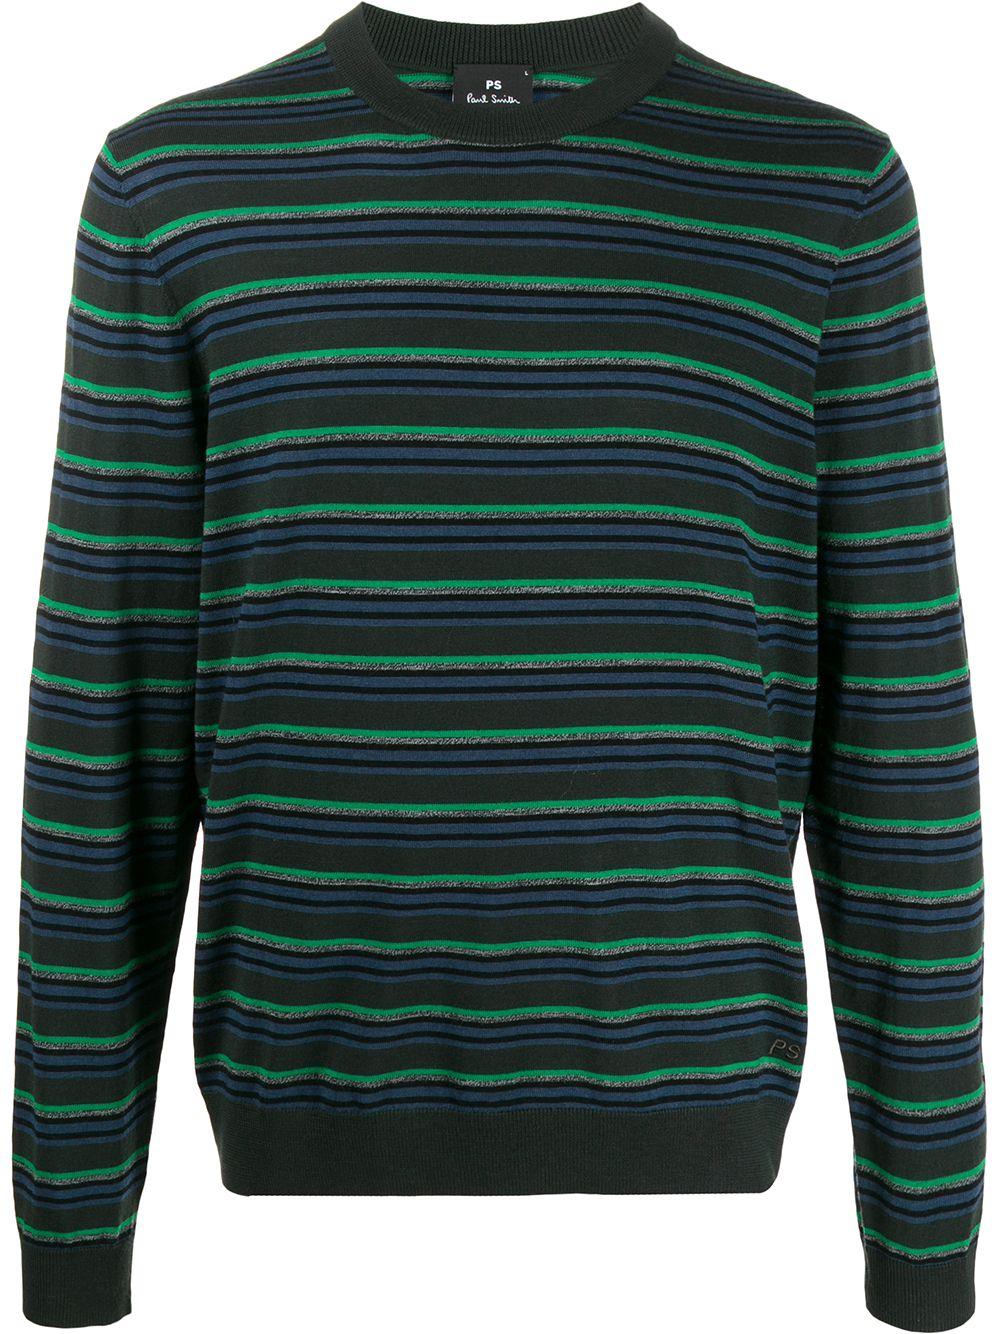 PS by Paul Smith Long Sleeved Striped Pullover in Green for Men - Lyst